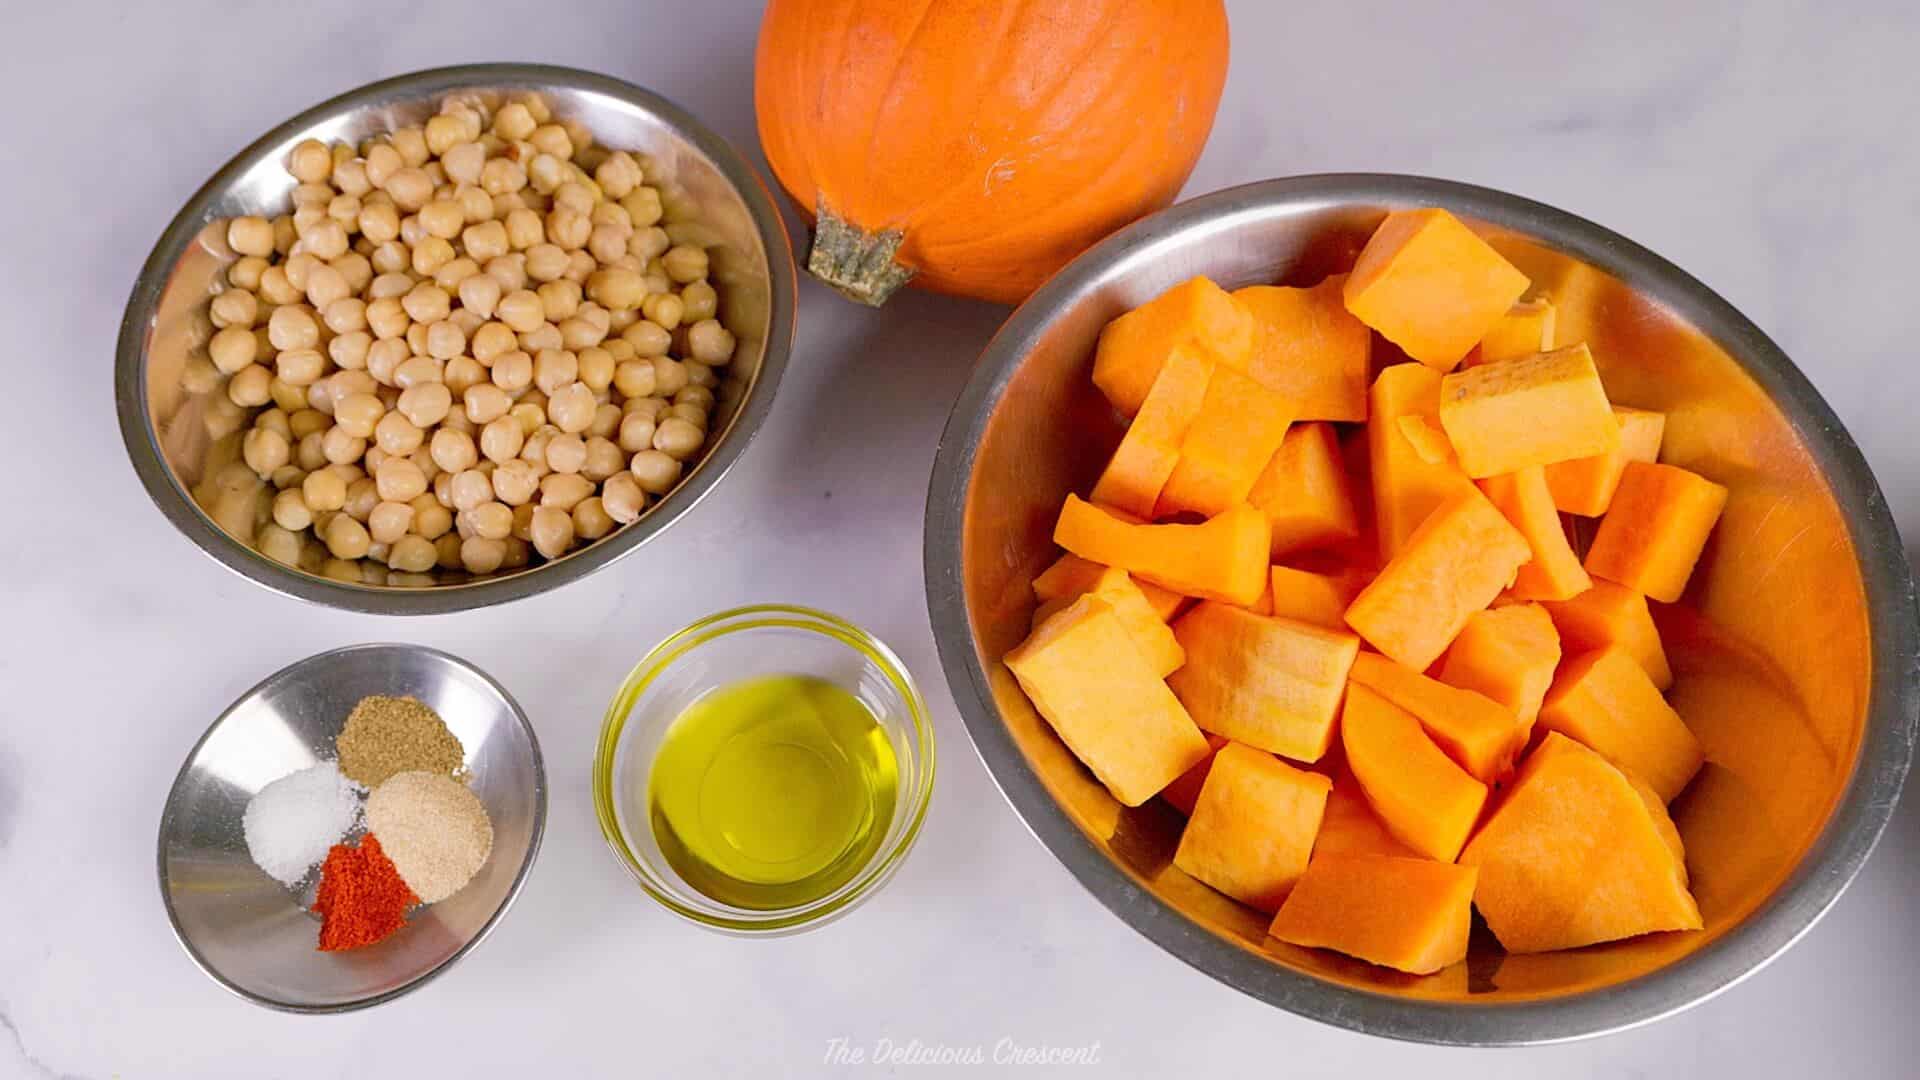 Ingredients needed for the roasted pumpkin and chickpeas.